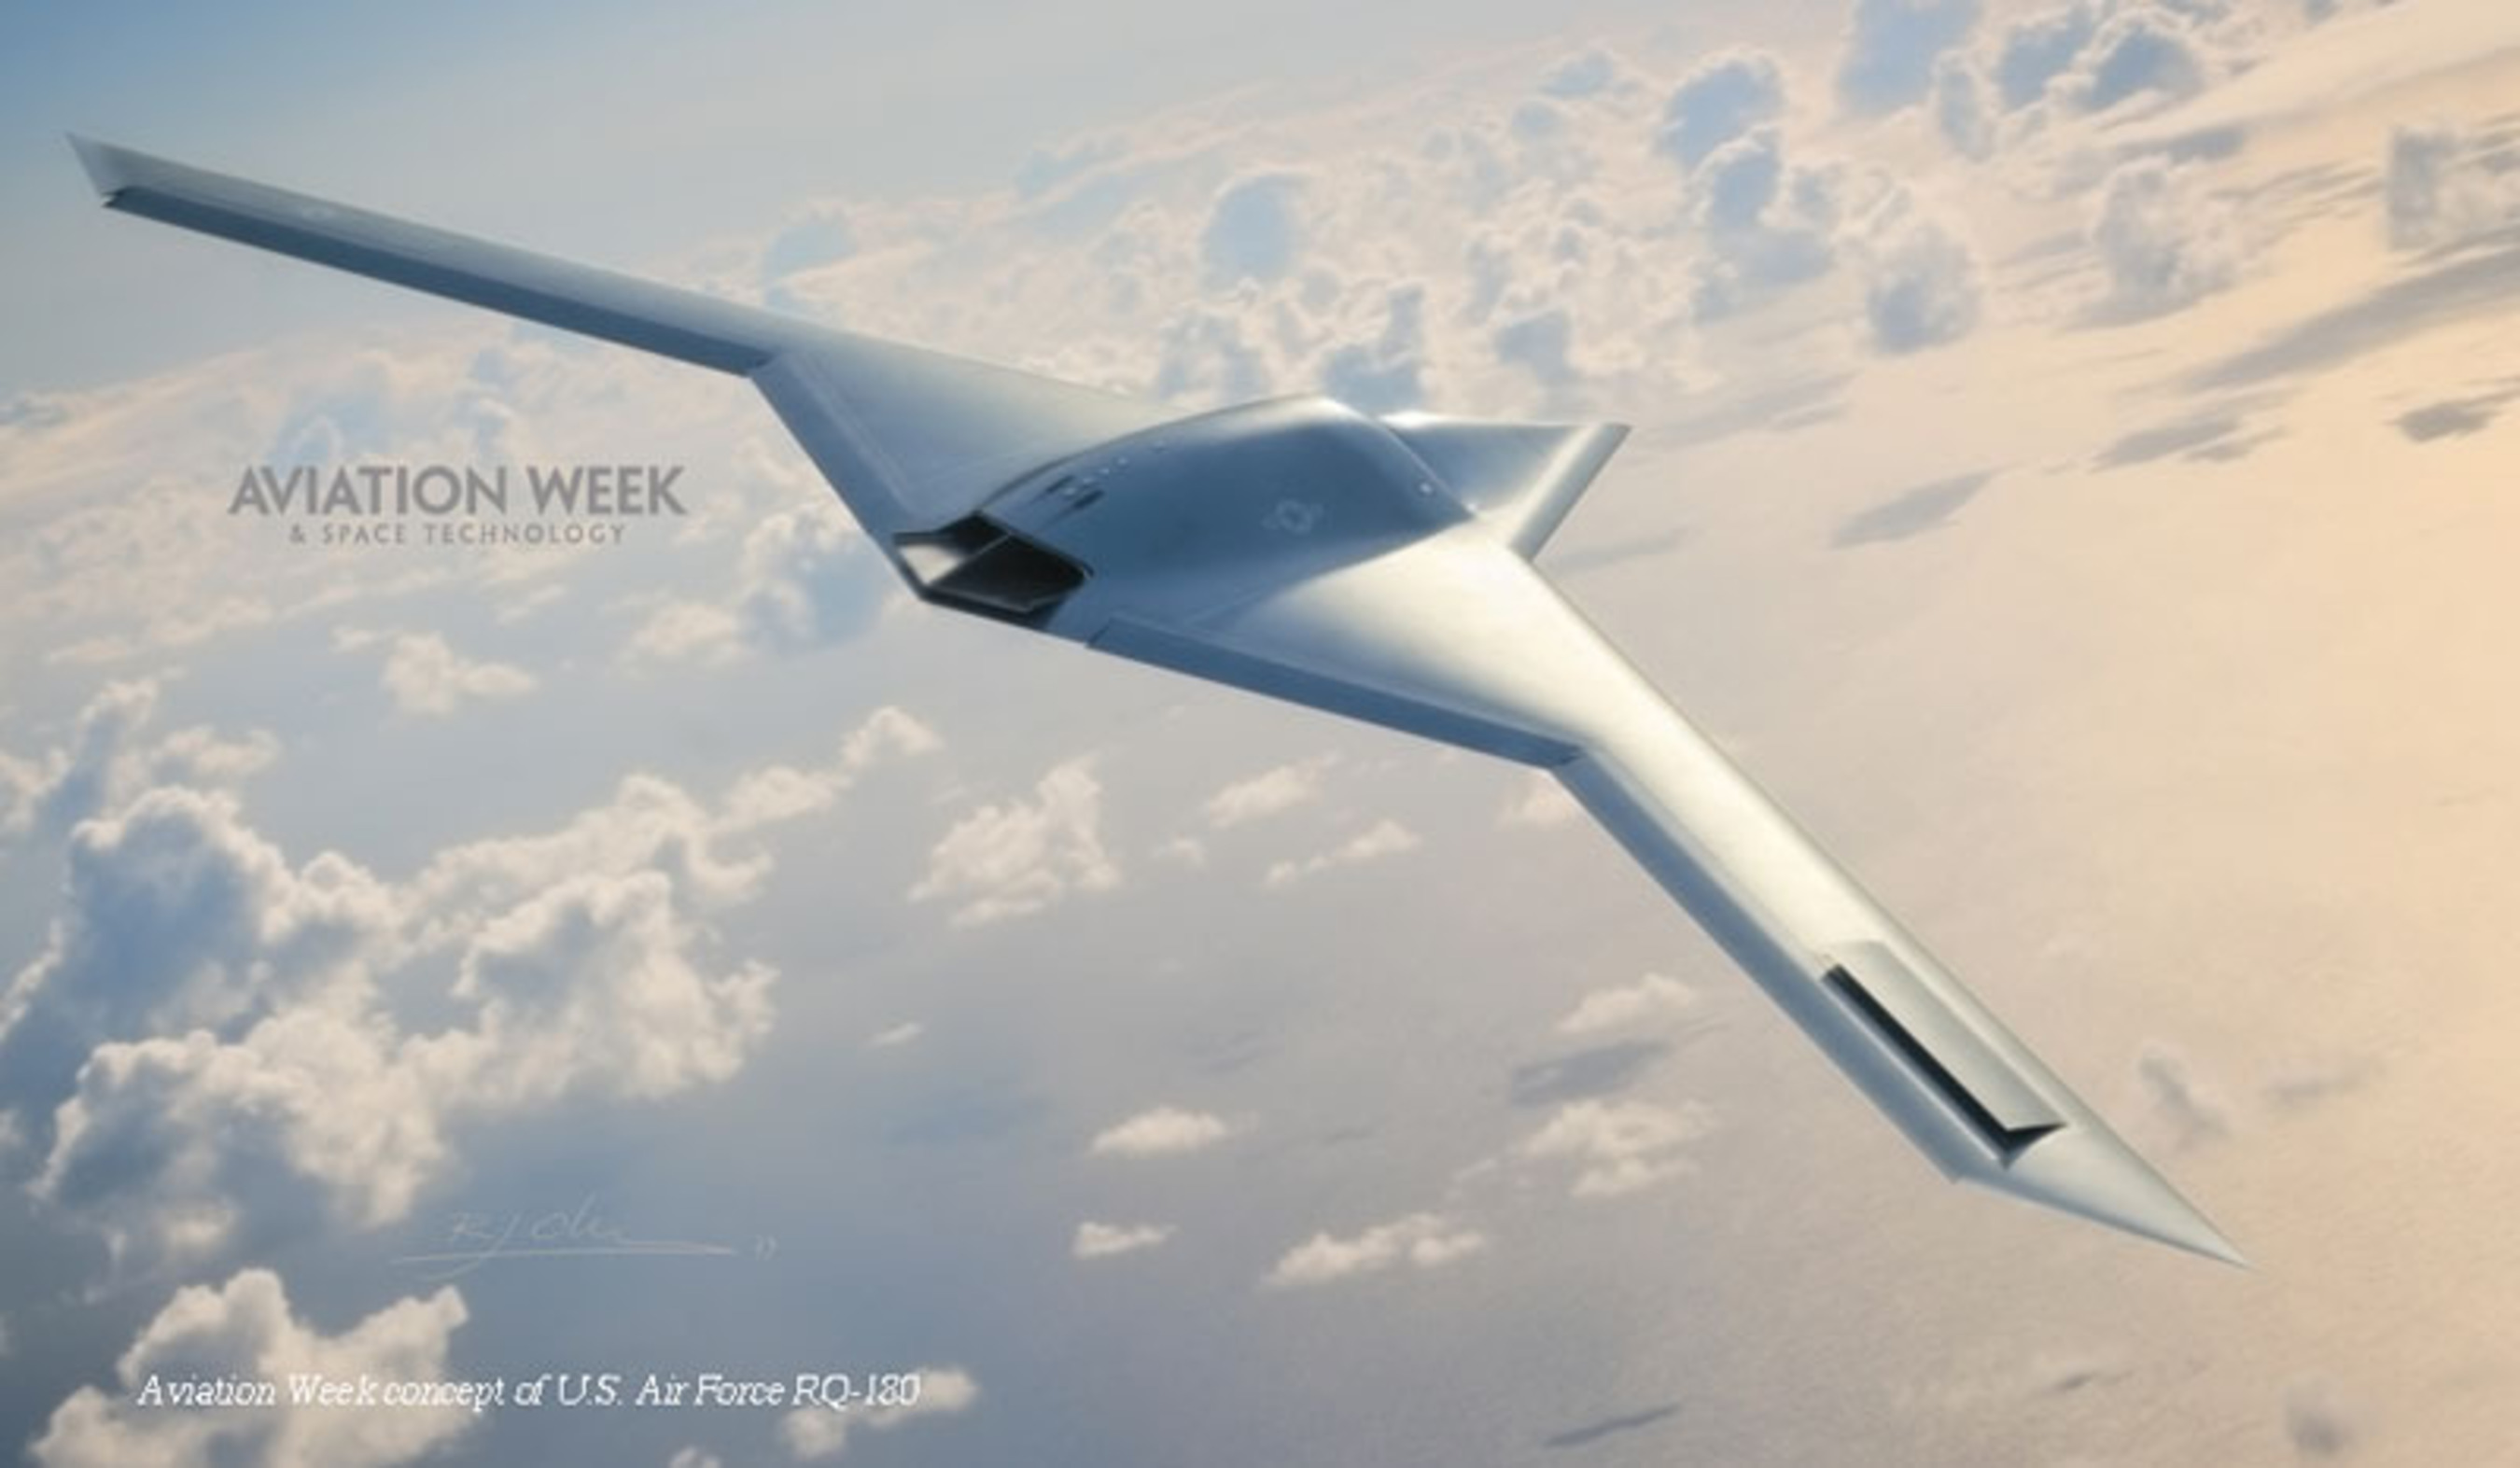 Penton's Aviation Week Uncovers New, Classified Unmanned Aircraft Flying at Area 51. (PRNewsFoto/Penton) (PRNewsFoto/PENTON)